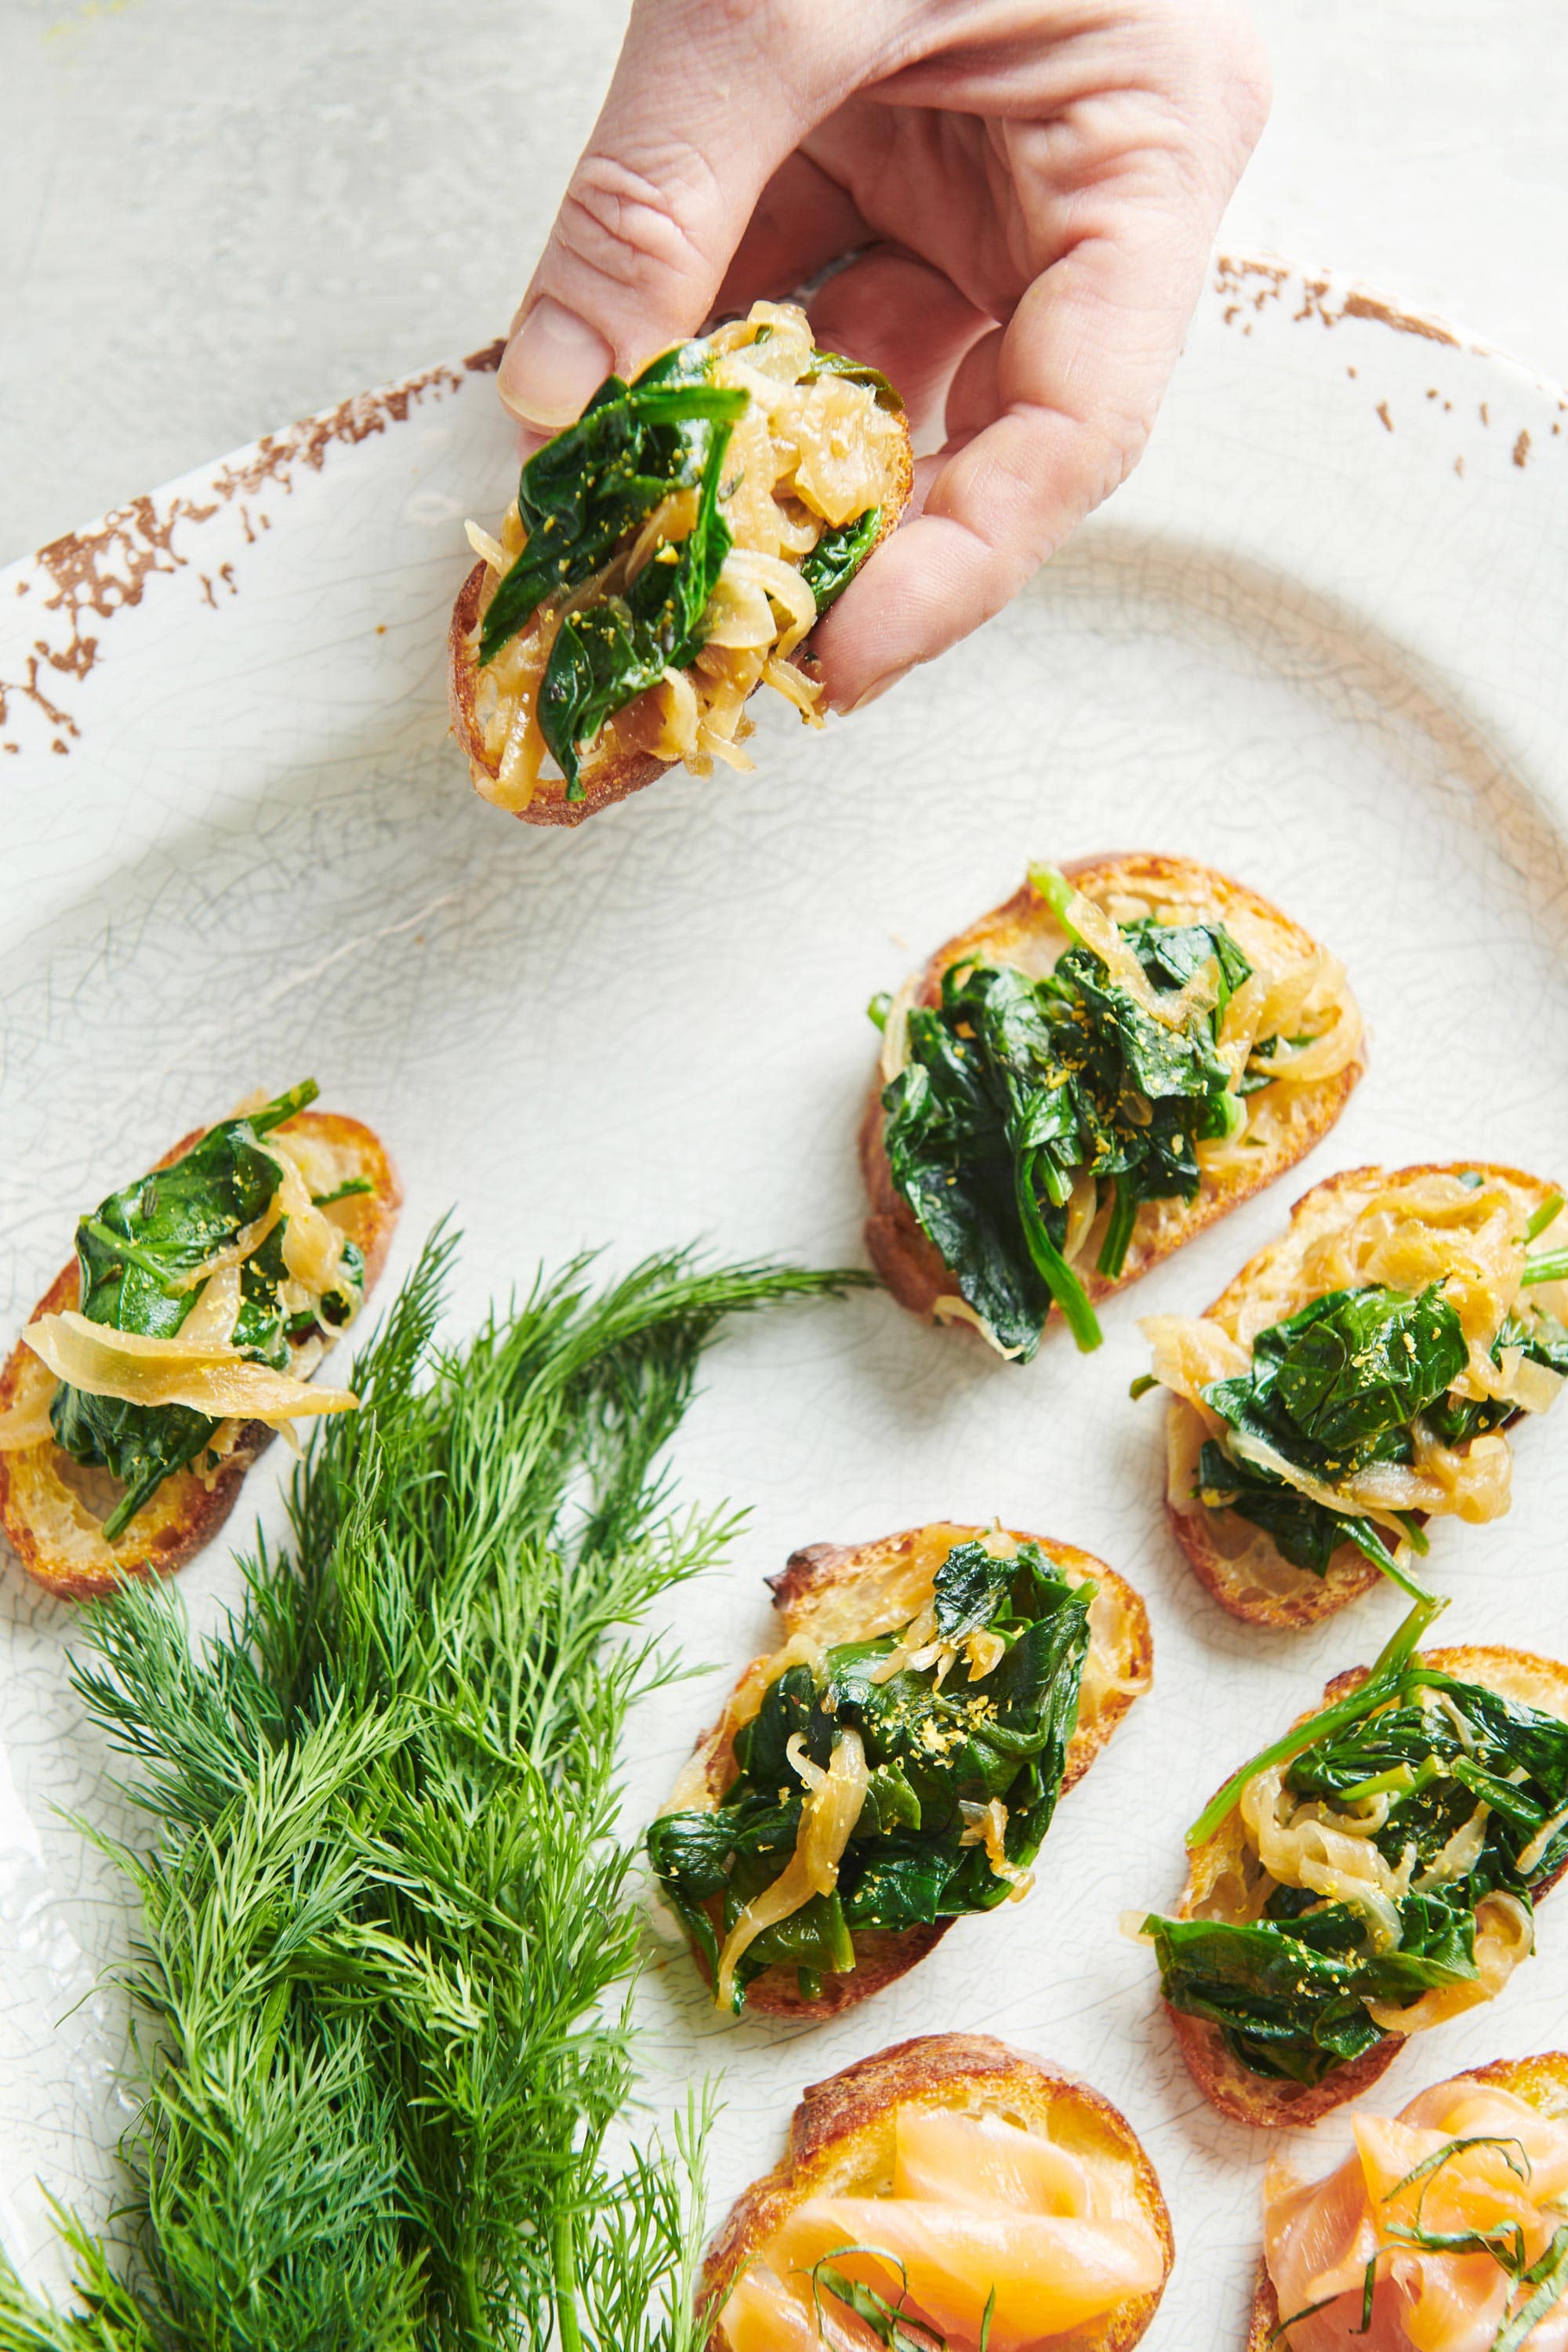 Woman grabbing a Caramelized Onion and Spinach Crostini from a plate.